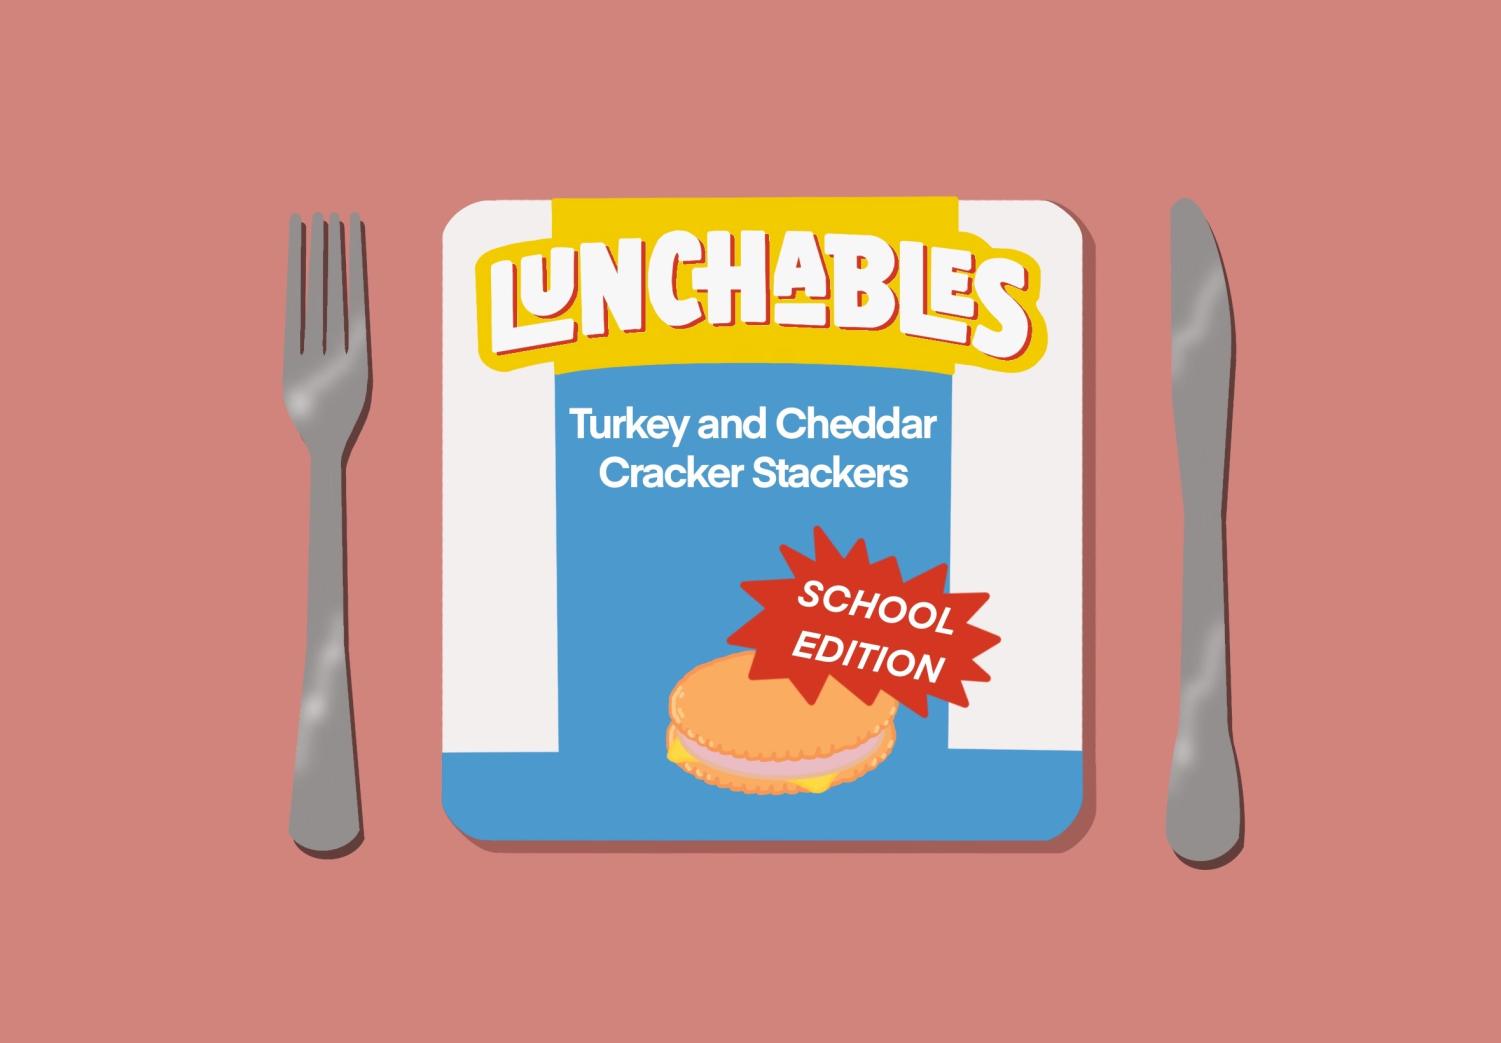 Implementation of Lunchables meals is an insufficient solution to